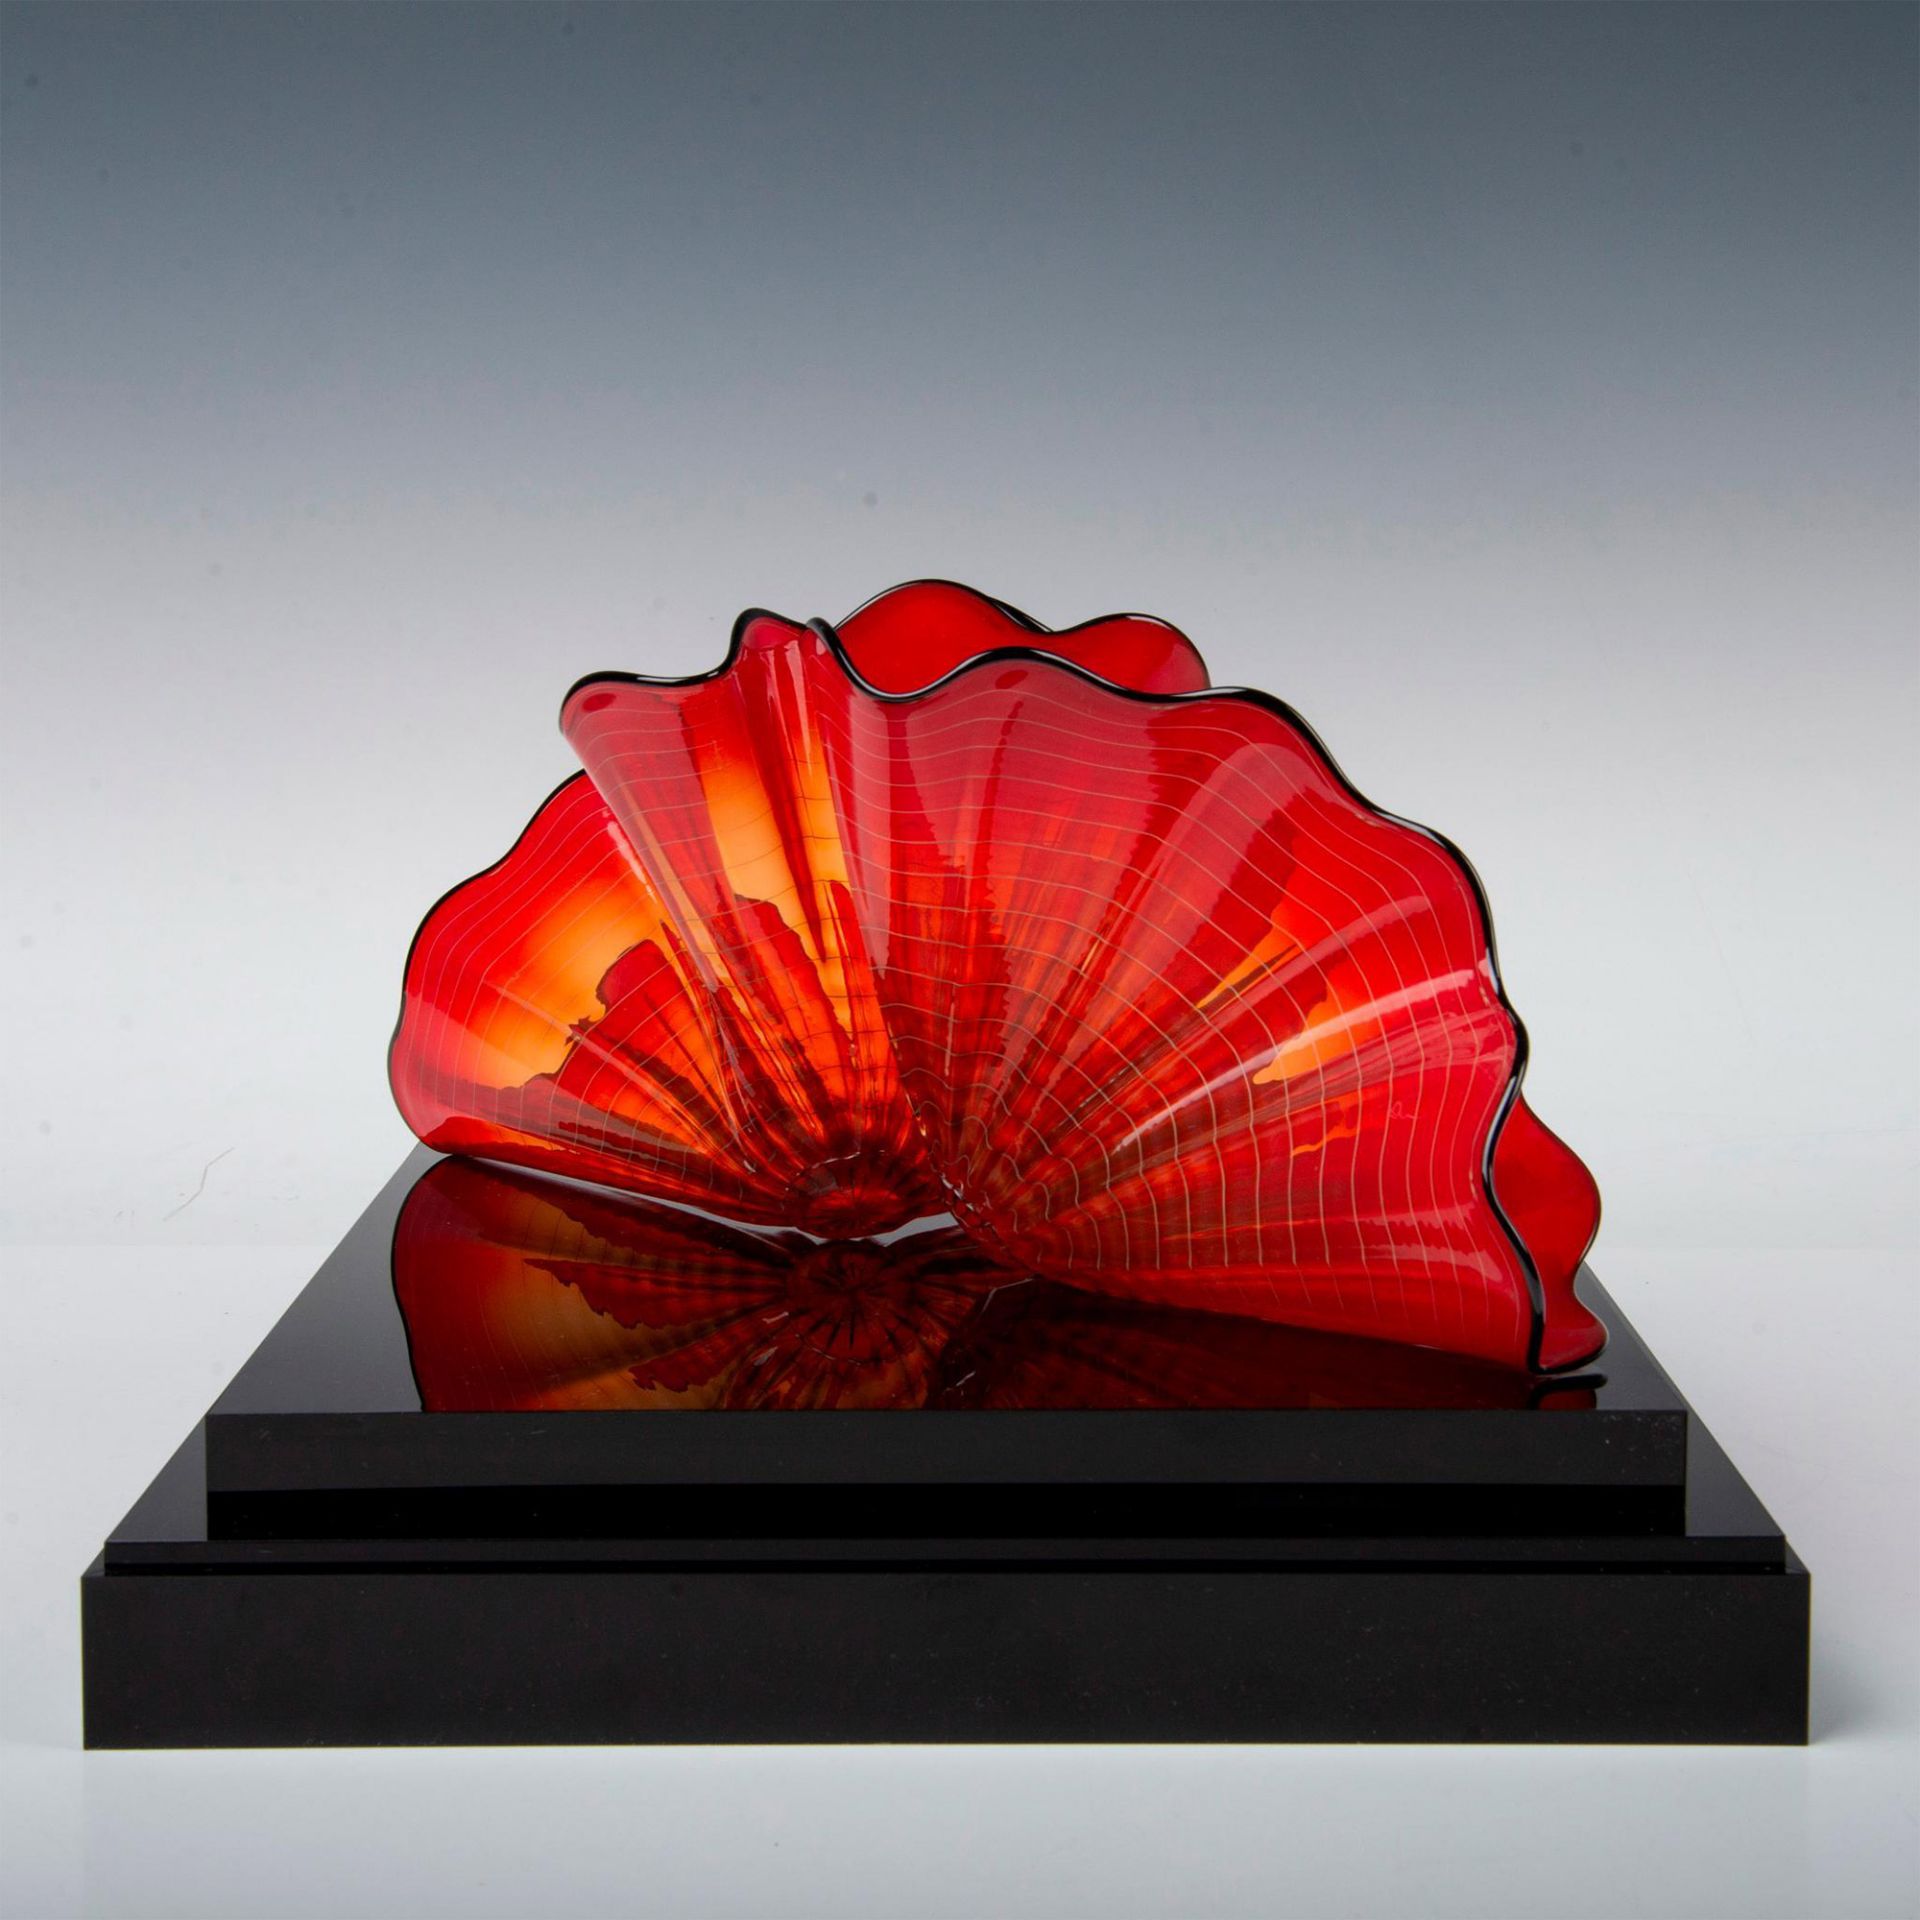 Dale Chihuly Portland Press Art Glass, Red Amber Persian Pair - Image 8 of 20